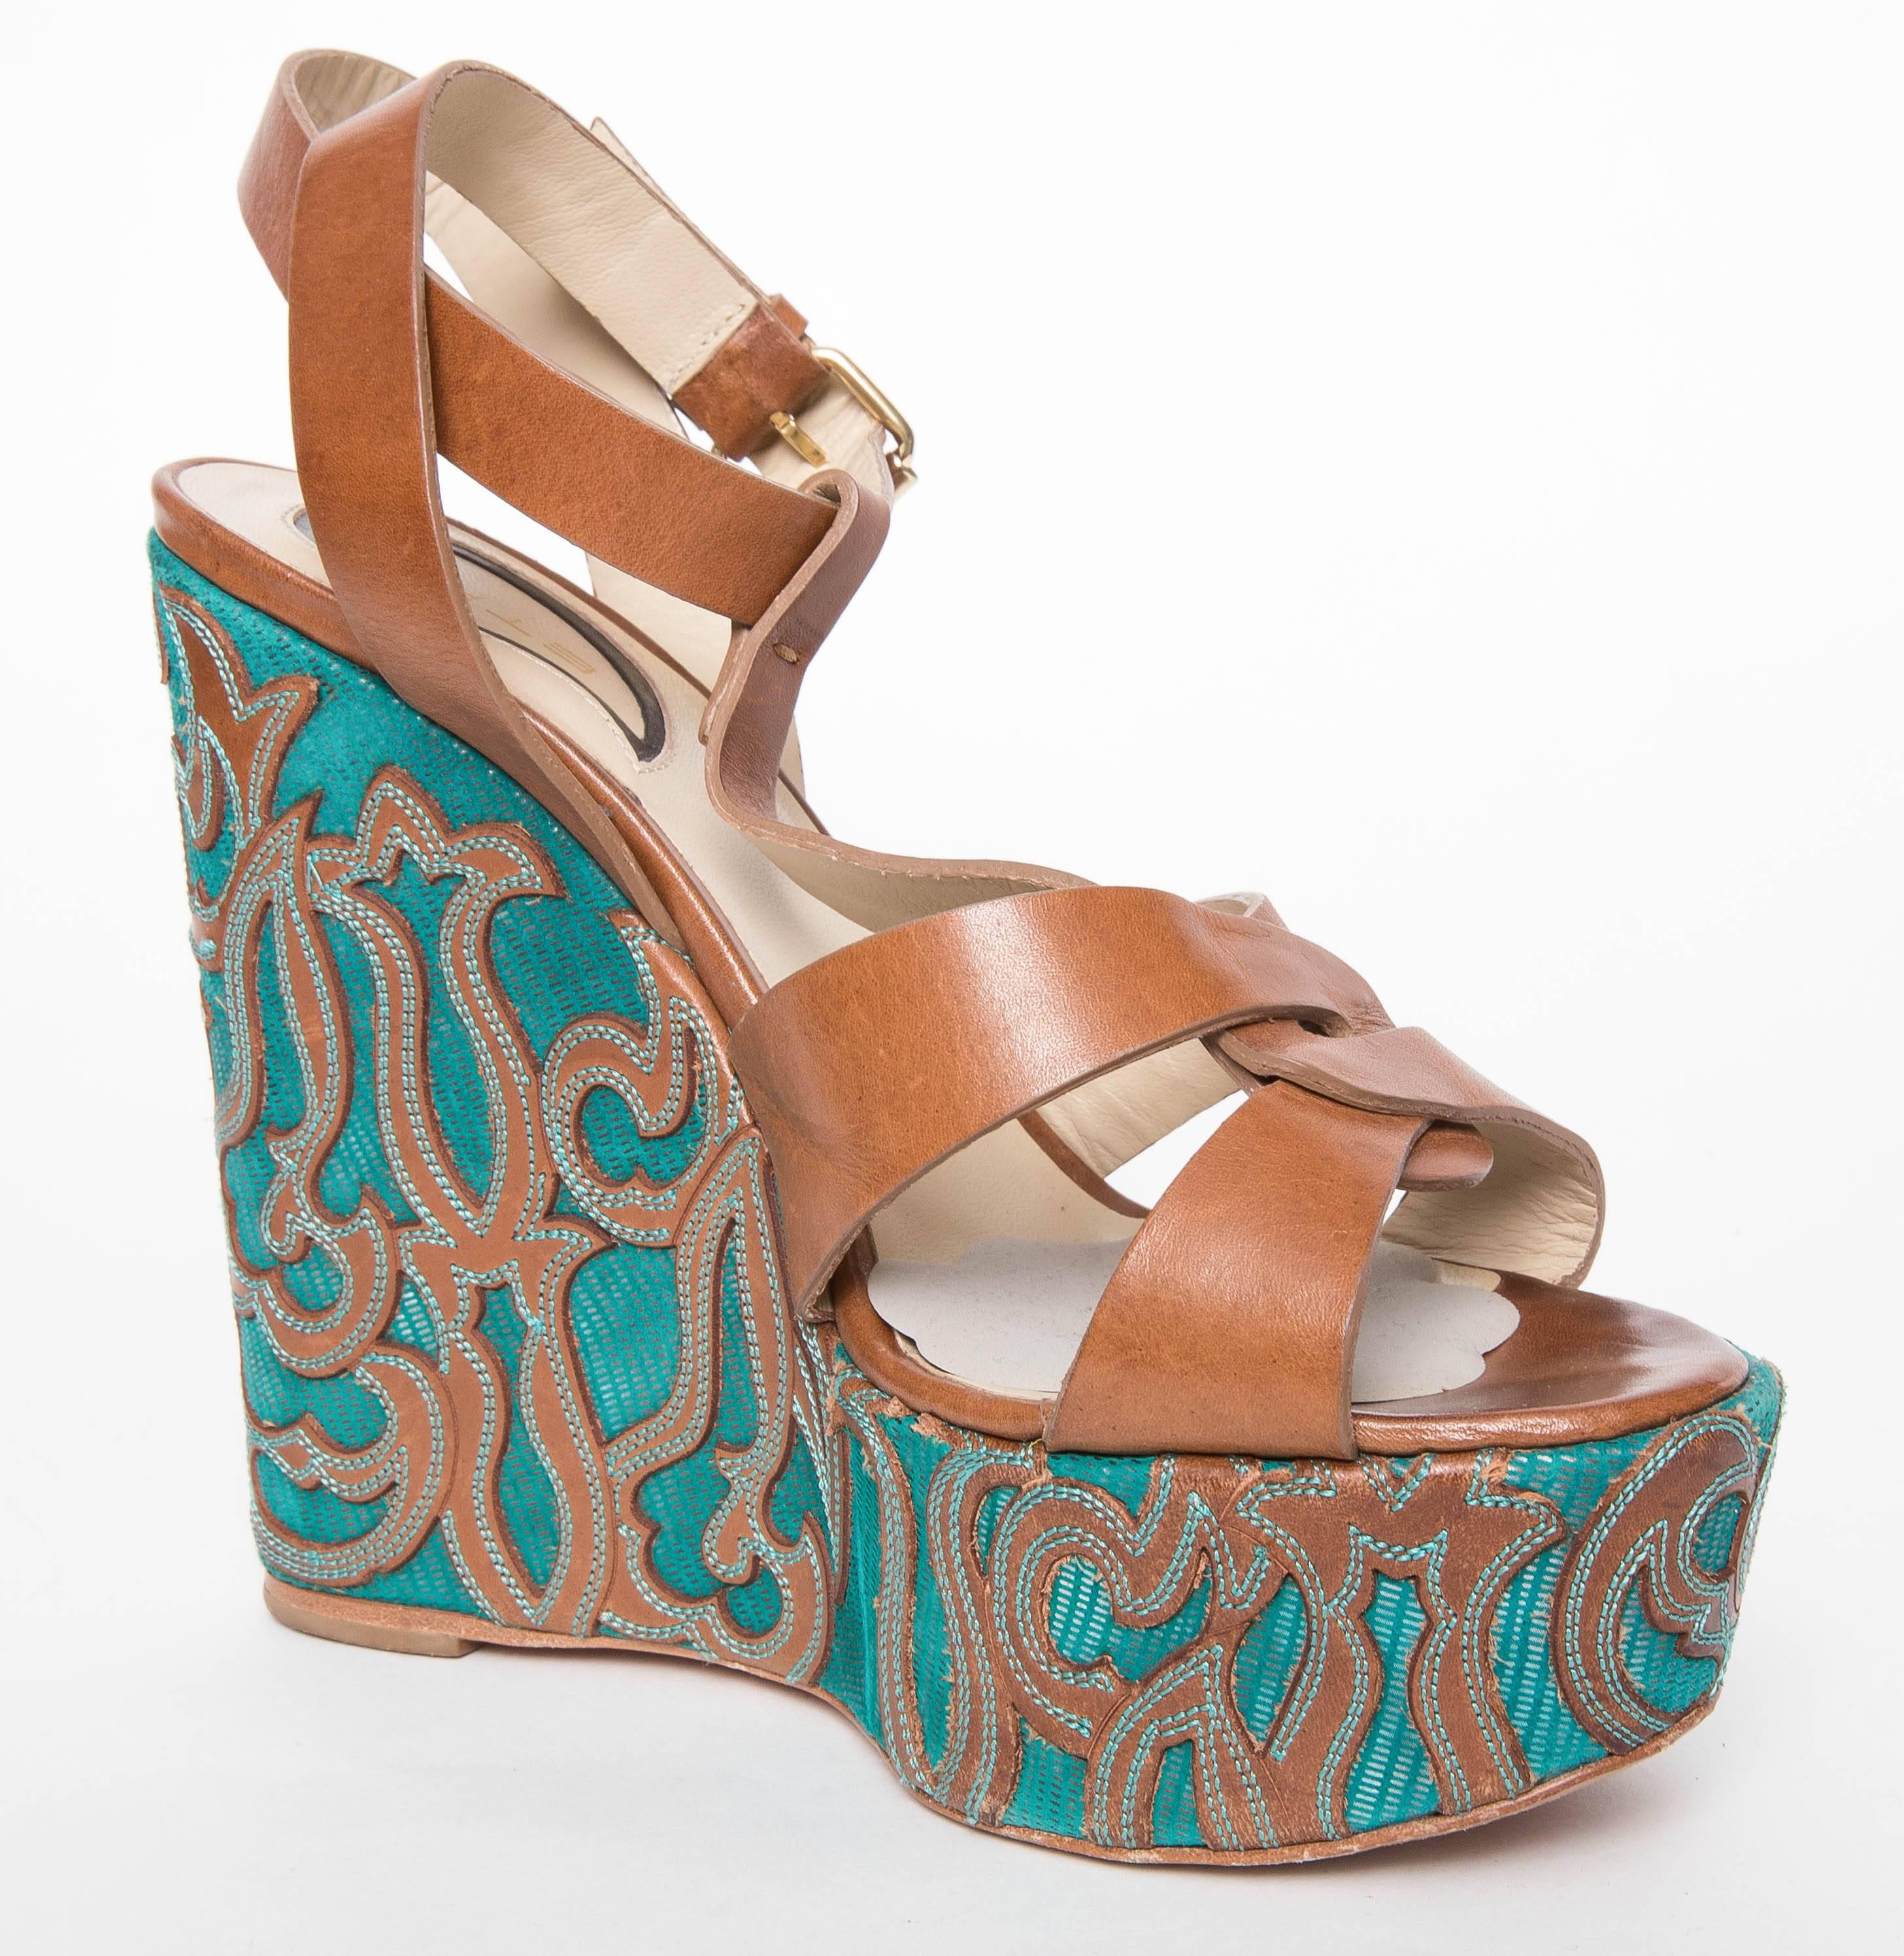 Etro Brown Leather and Turquoise Sole Wedged Sandals In Good Condition For Sale In Westhampton Beach, NY